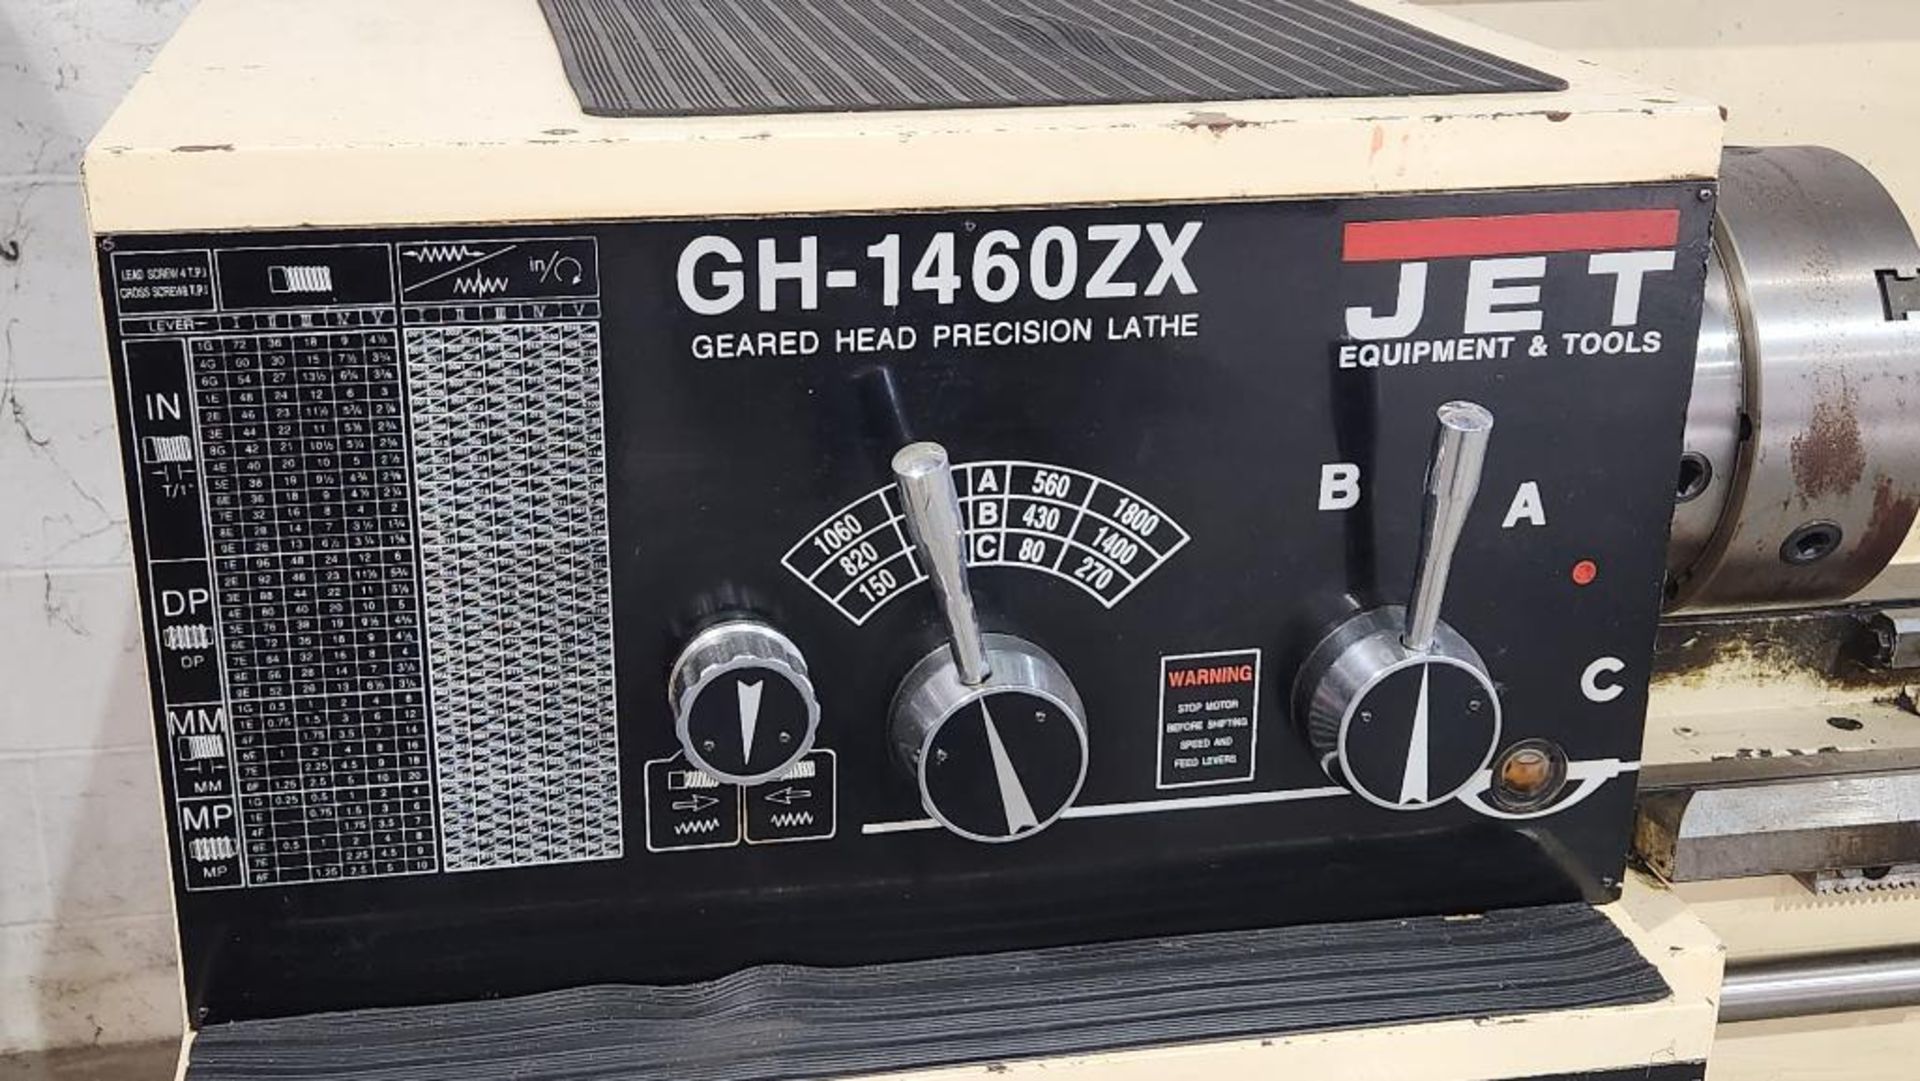 Jet Geared Head Precision Lathe, Model GH-1460ZX, S/N 000821ZX204, 230V/460V, 3-Phase - Image 10 of 14